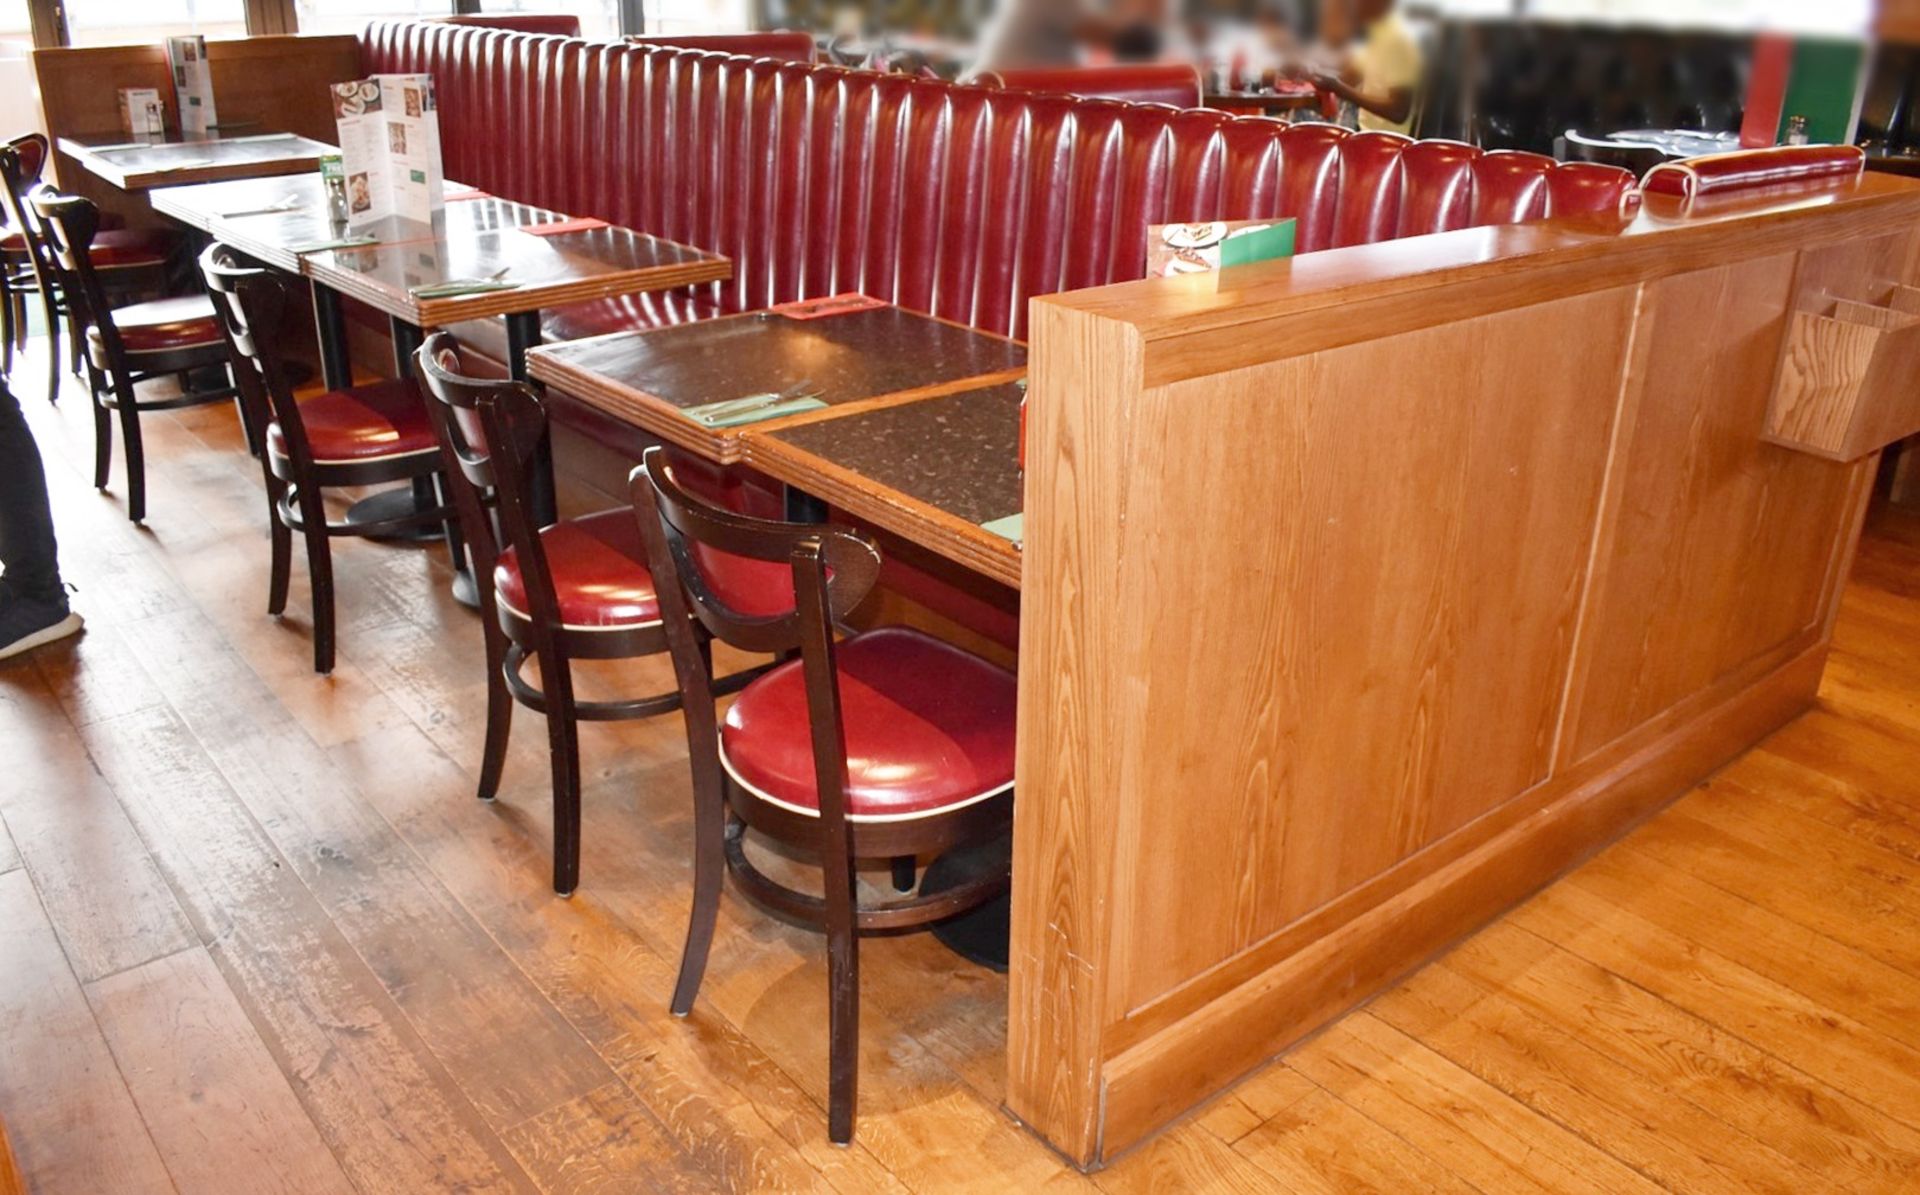 1 x Long Restaurant Seating Bench - Retro 1950s American Diner Design - Red Faux Leather - Image 5 of 5